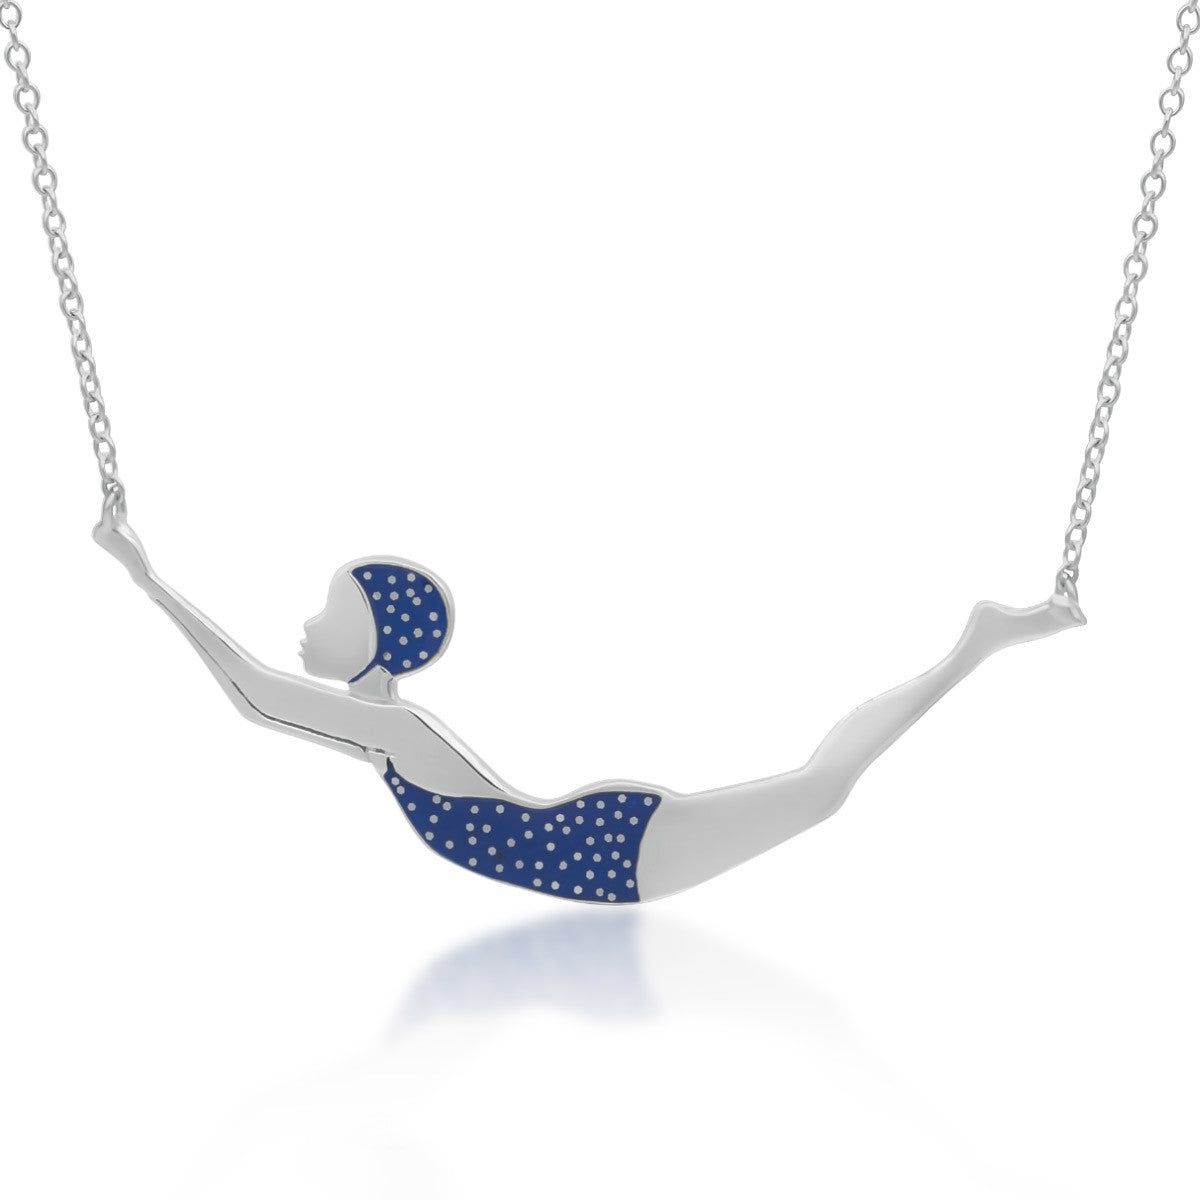 swimmer necklace in sterling silver with blue enamel and silver dots